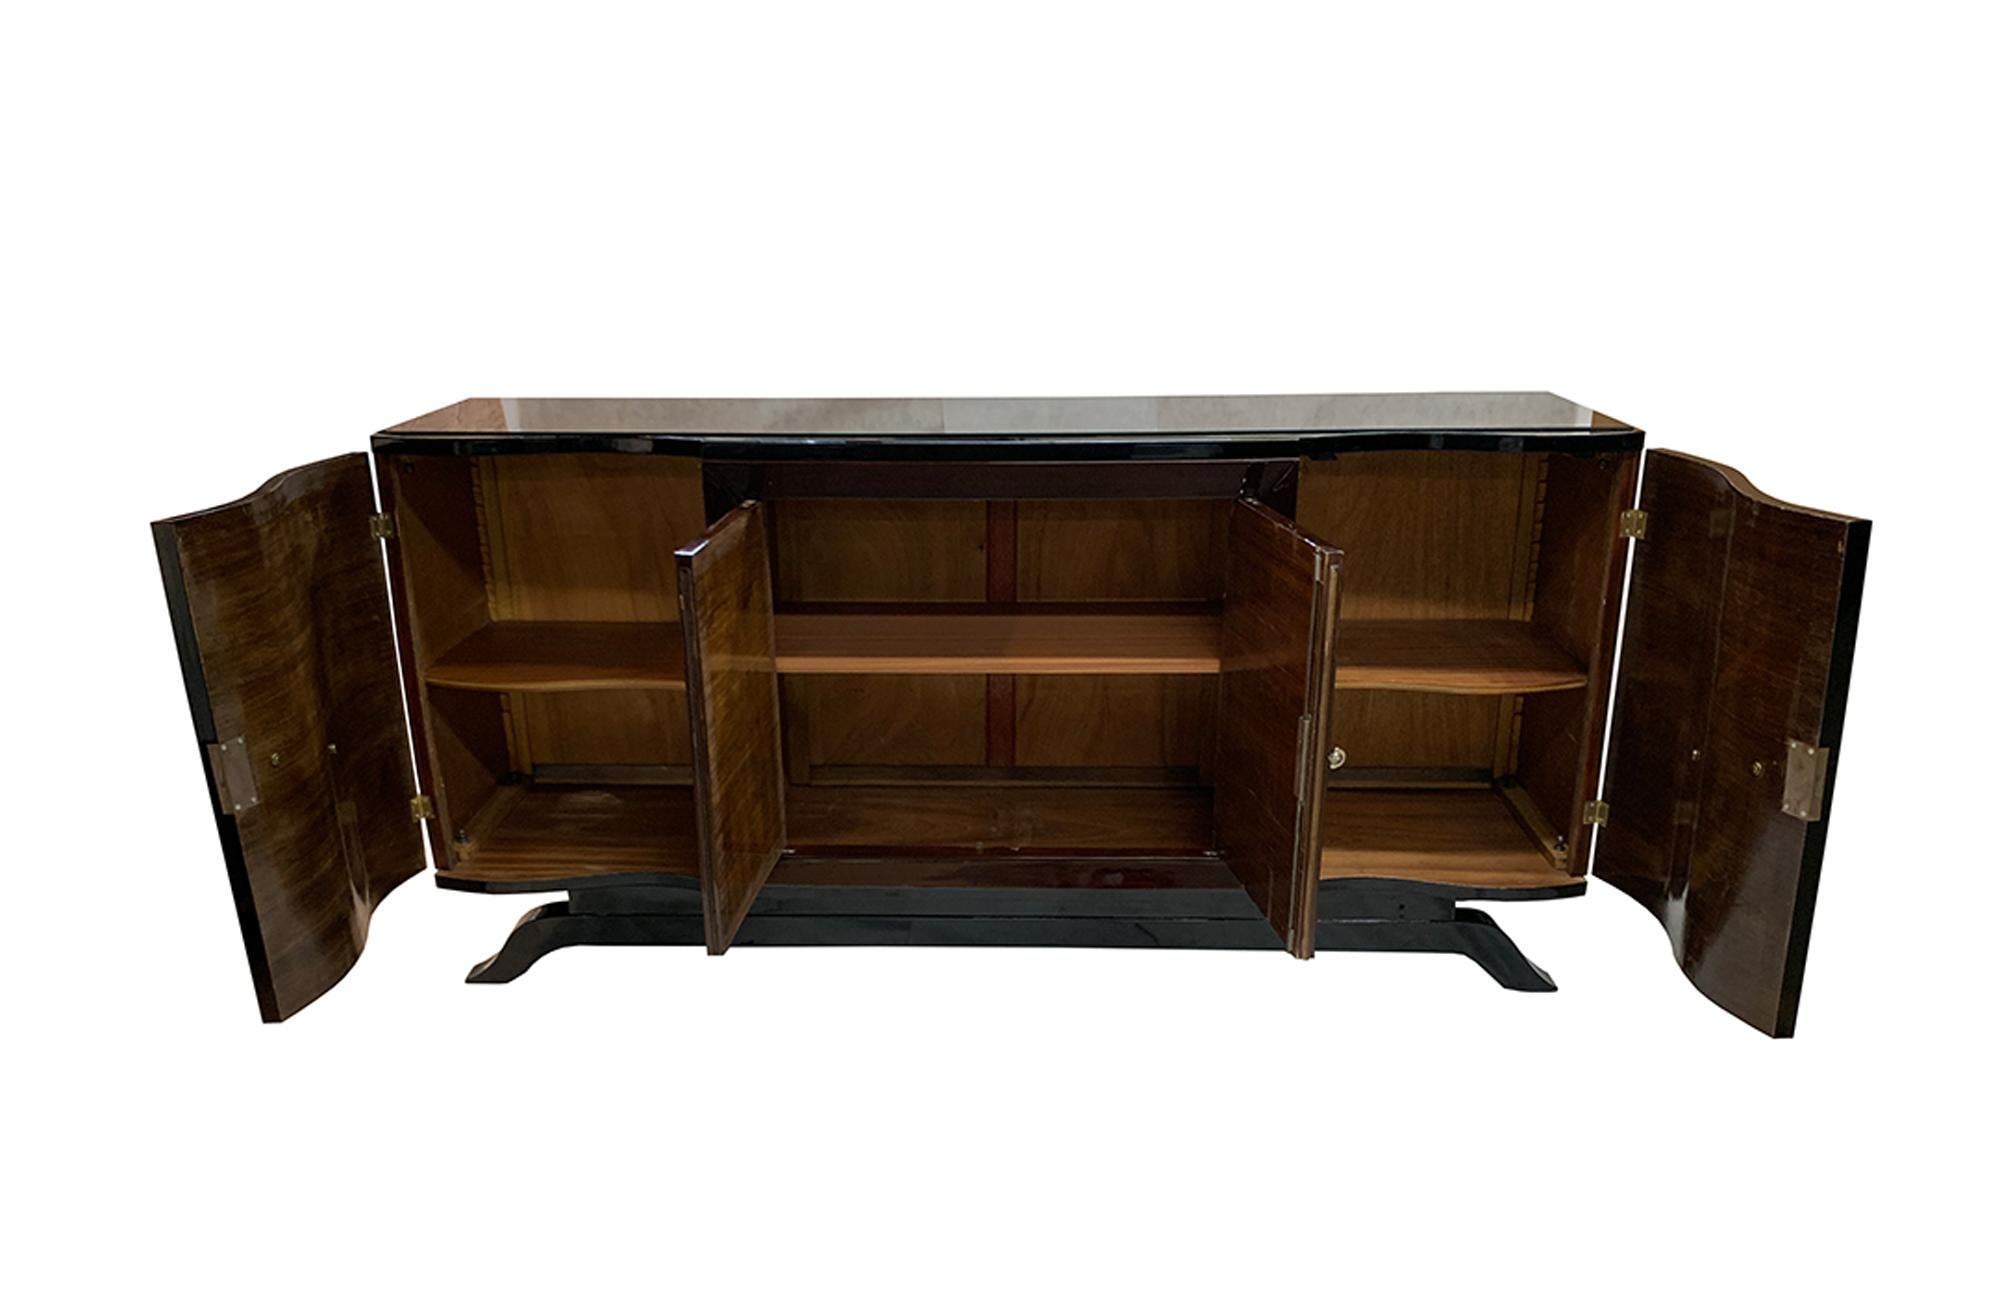 Mid-20th Century Luxe Art Deco Sideboard Credenza Buffet in Palisander and Black Lacquer